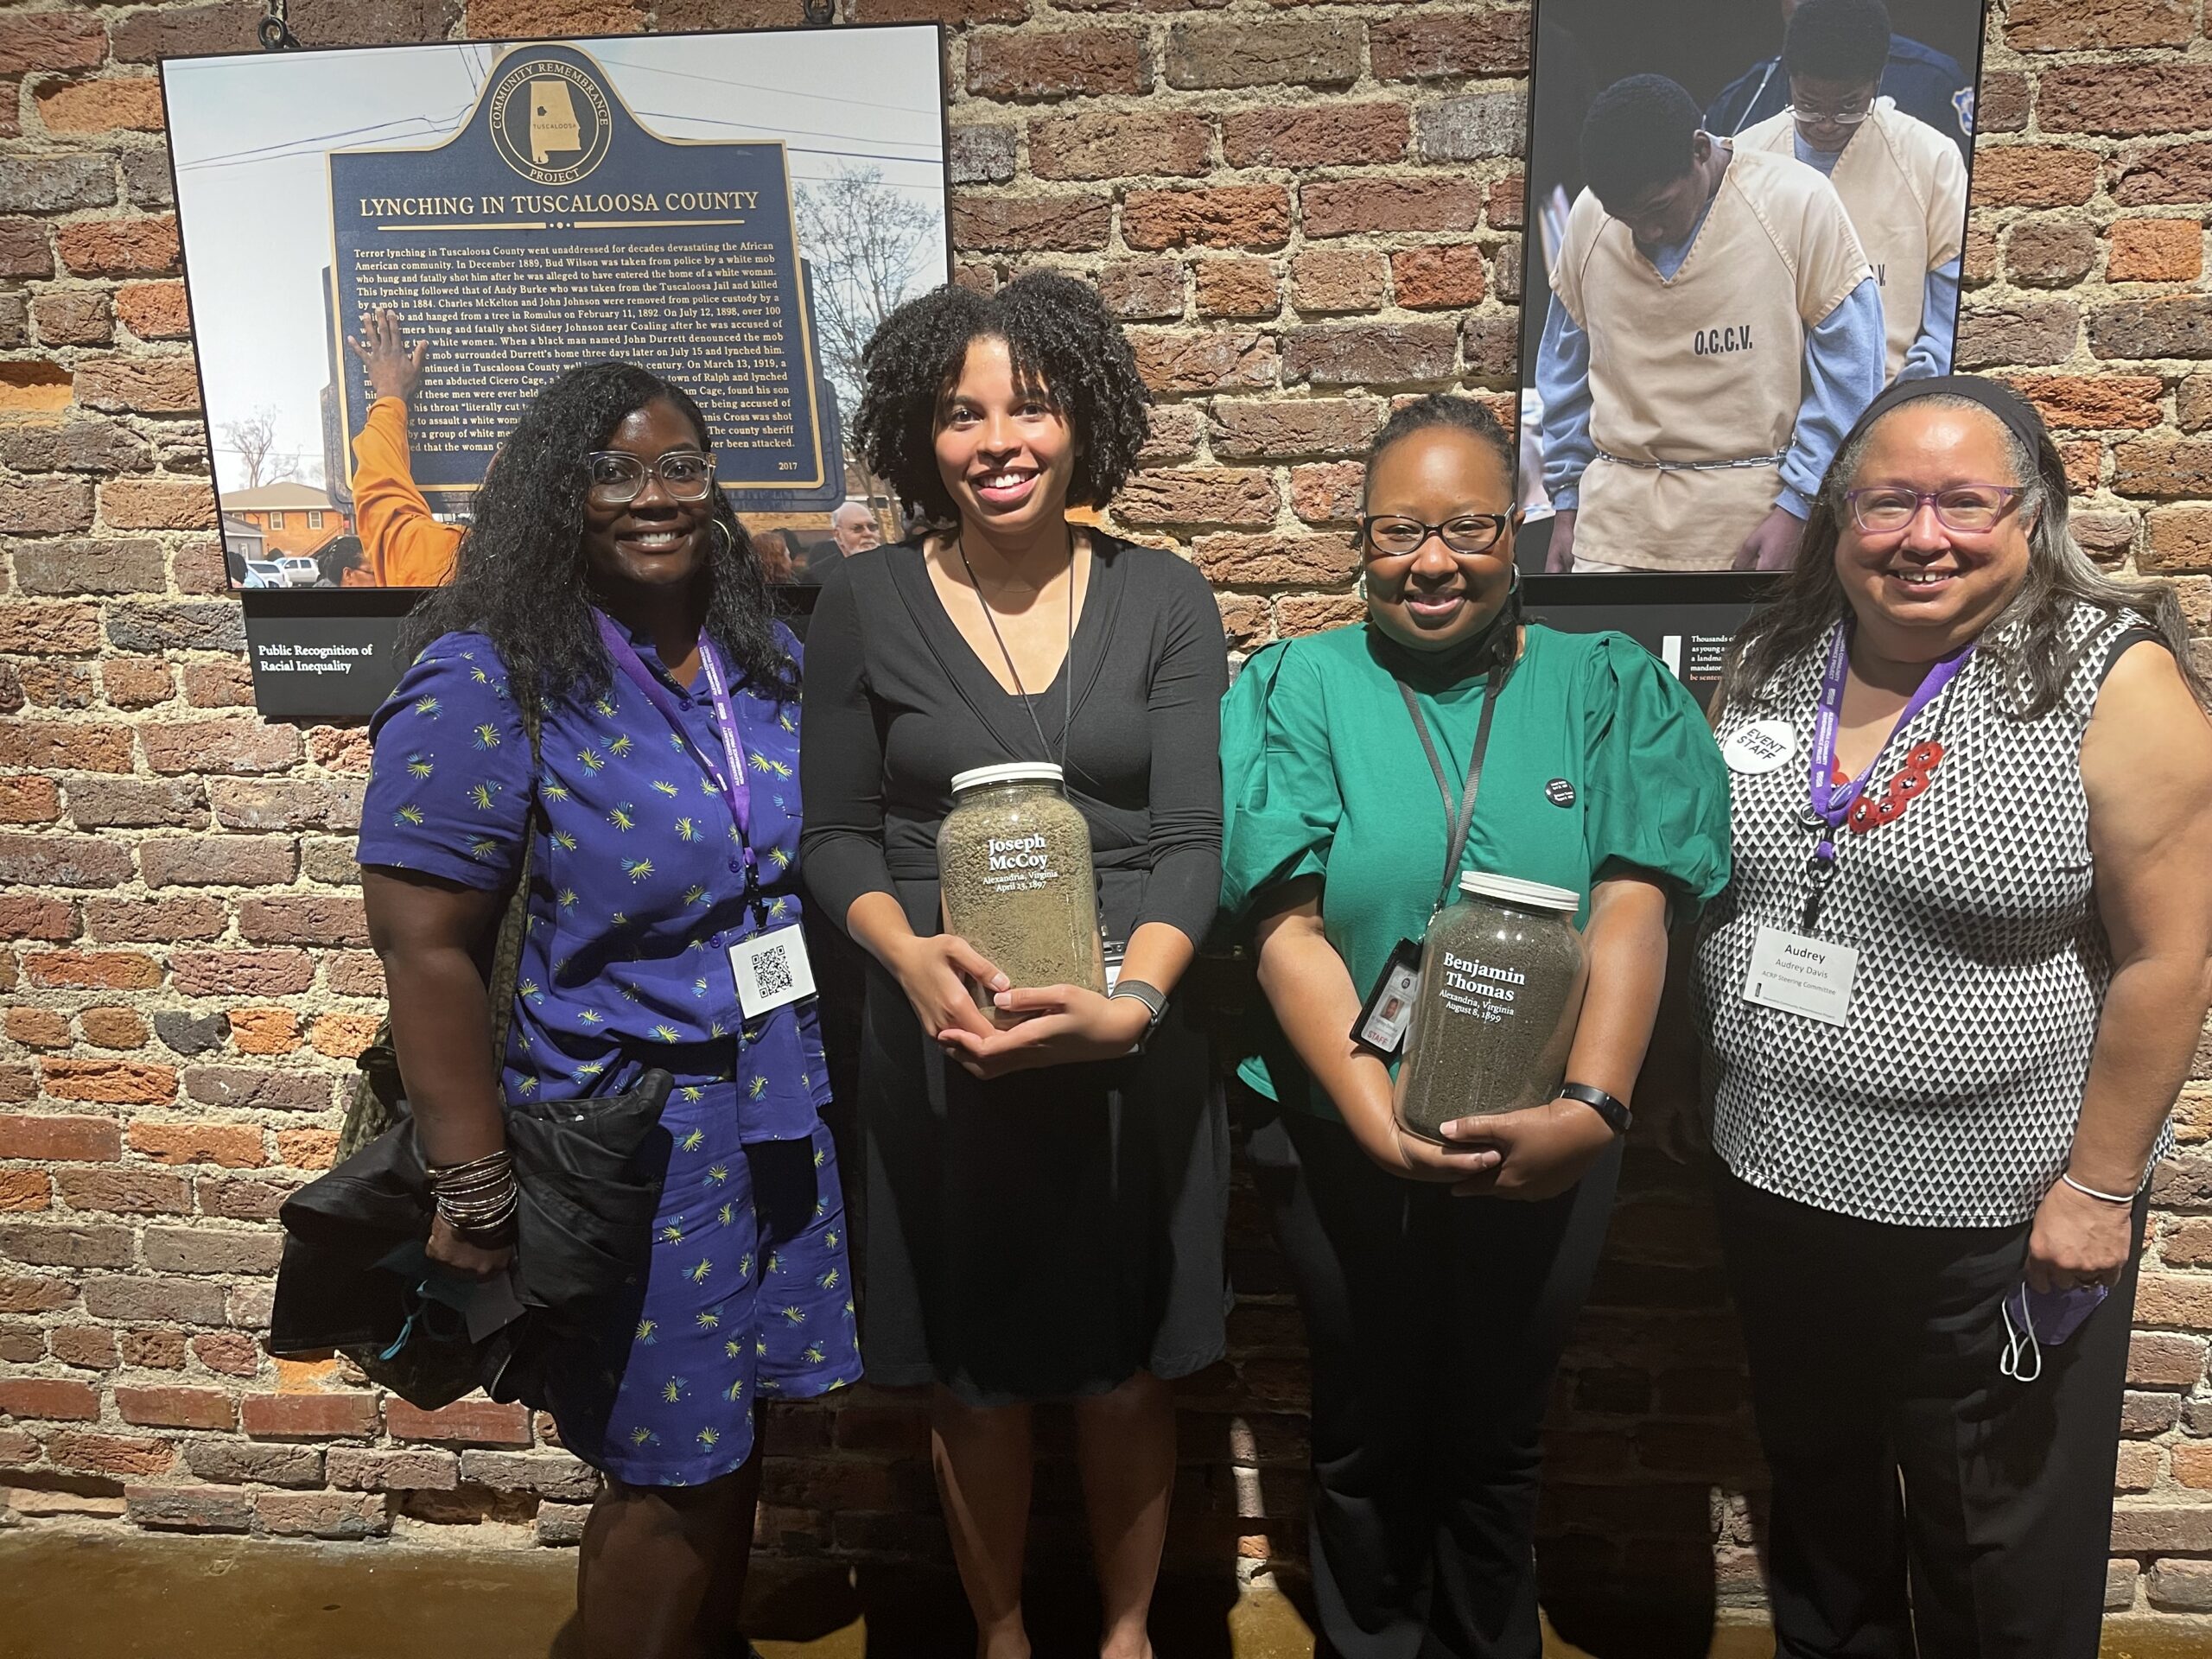 From Left to Right: Shenise (Munch Travelogue), Equal Justice Initiative Representatives and Audrey Davis (Office of Historic Alexandria)